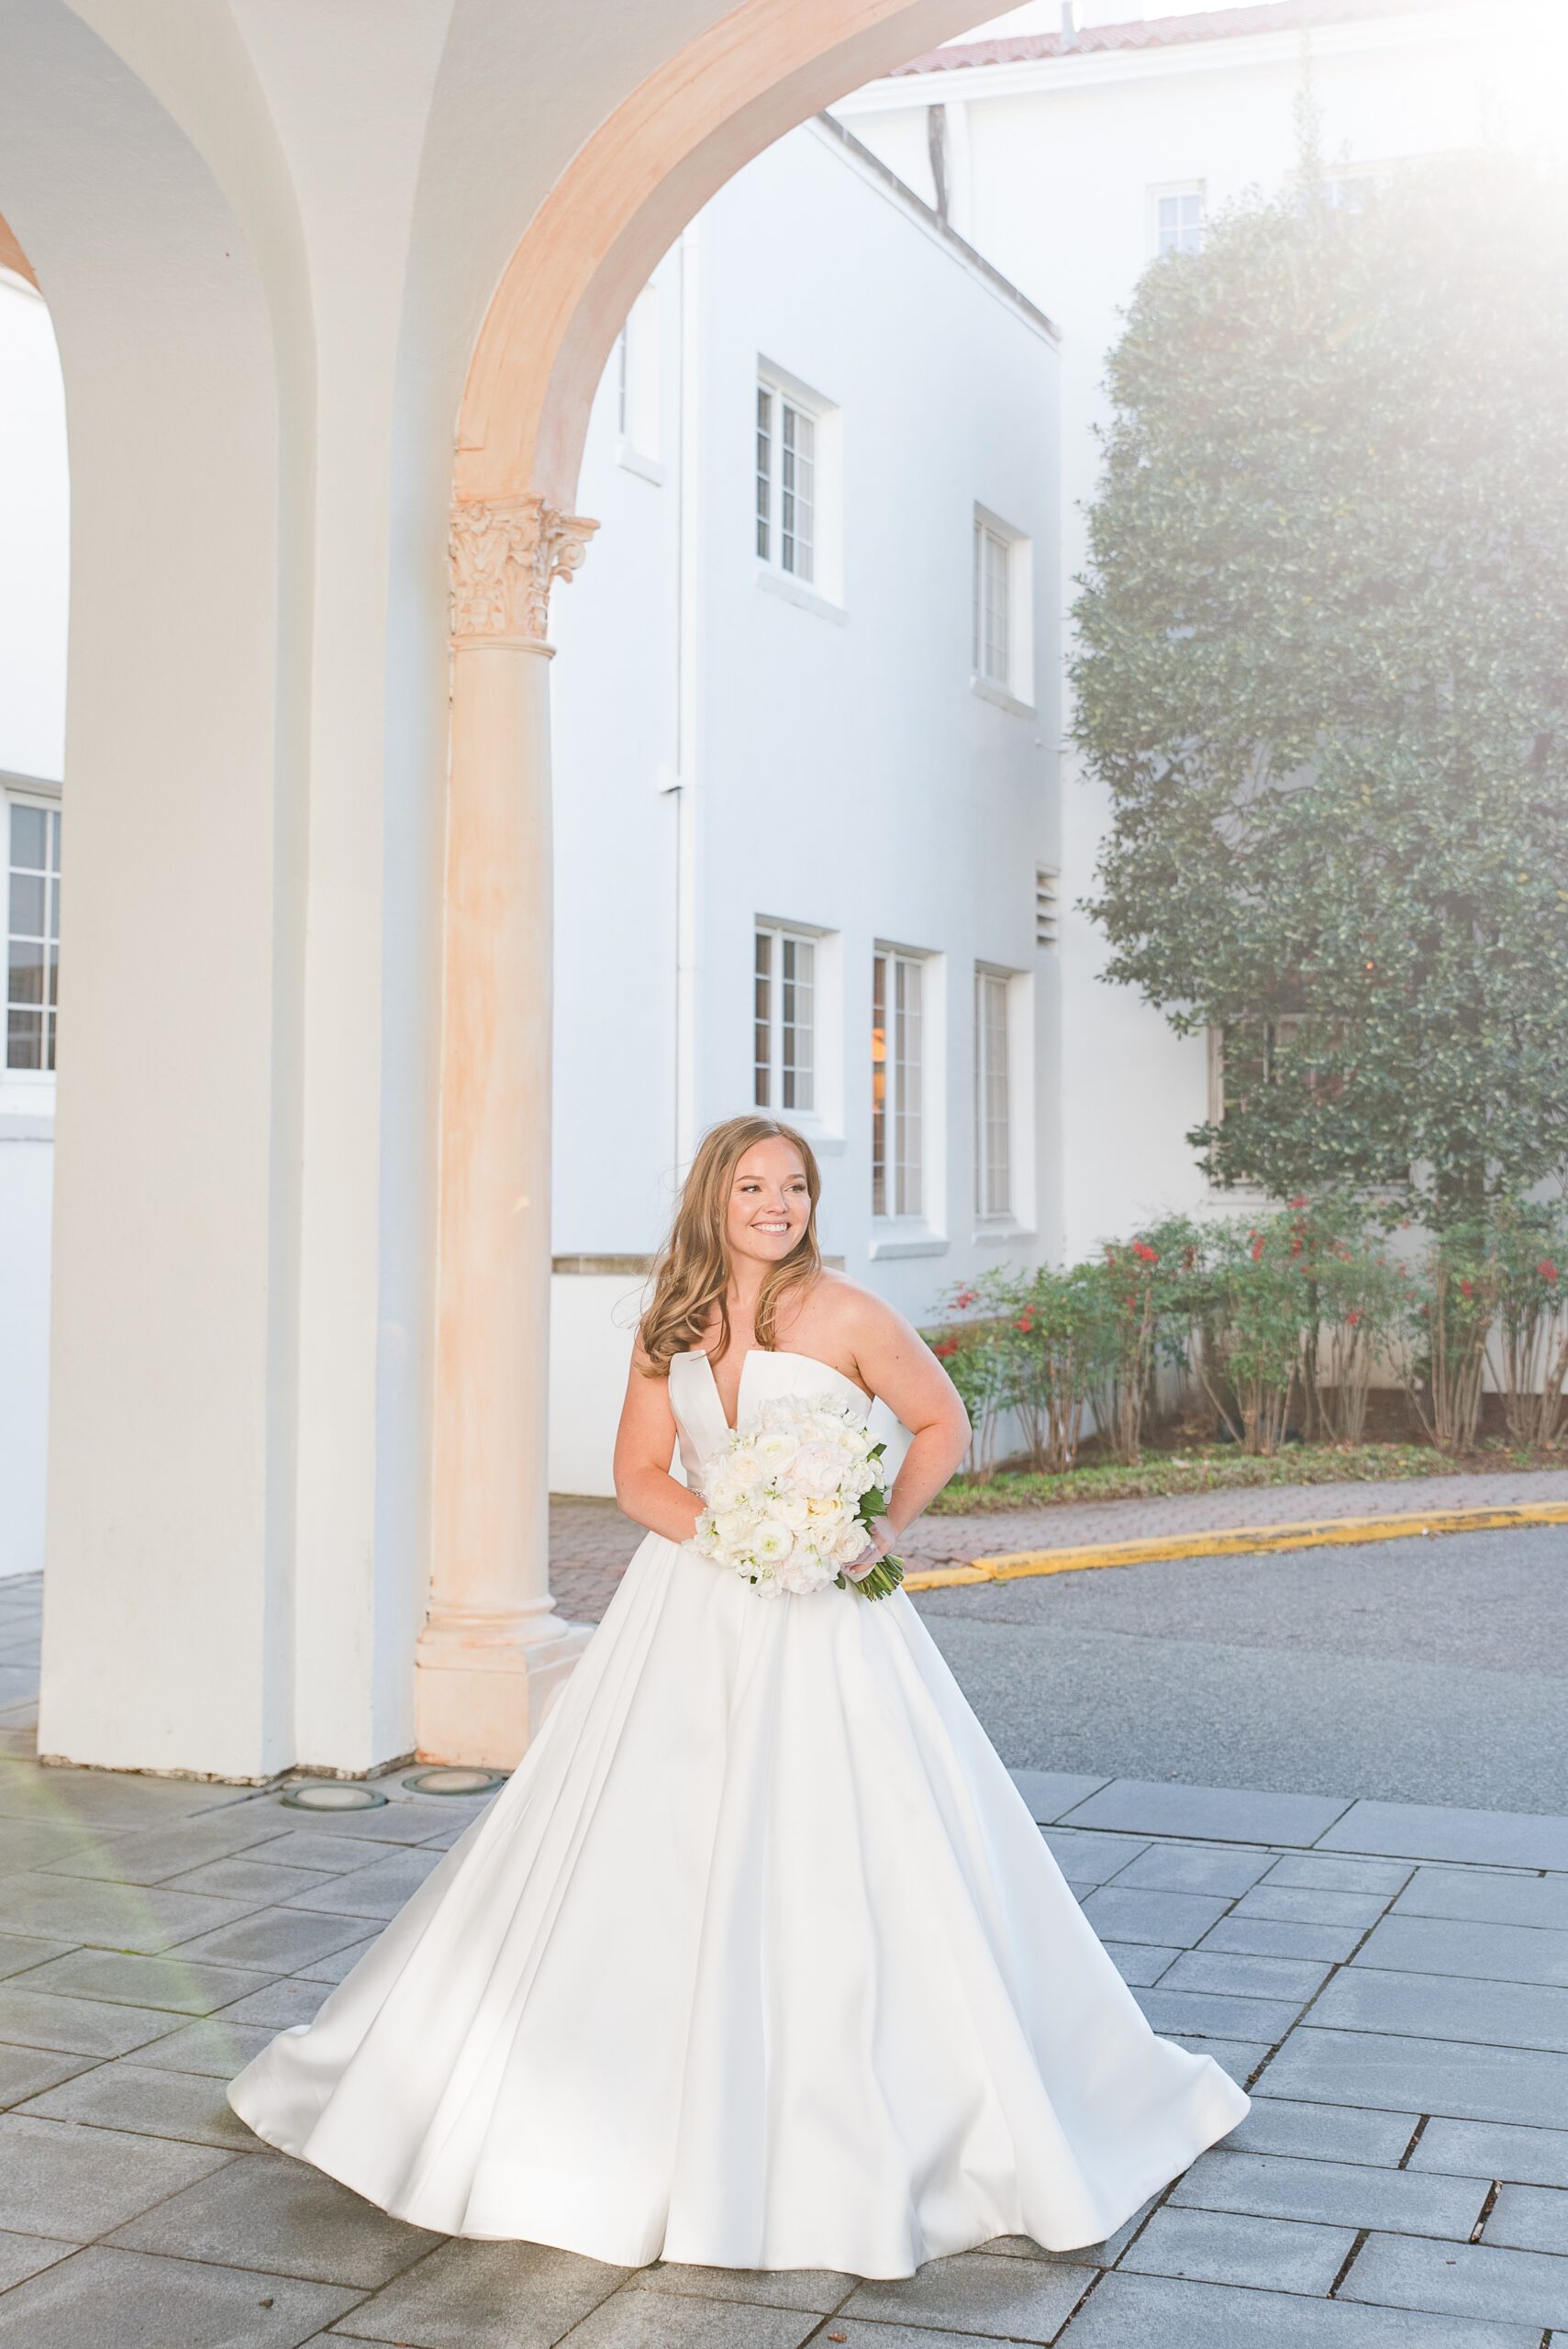 A bride smiles over her shoulder while standing in a car port holding her white bouquet